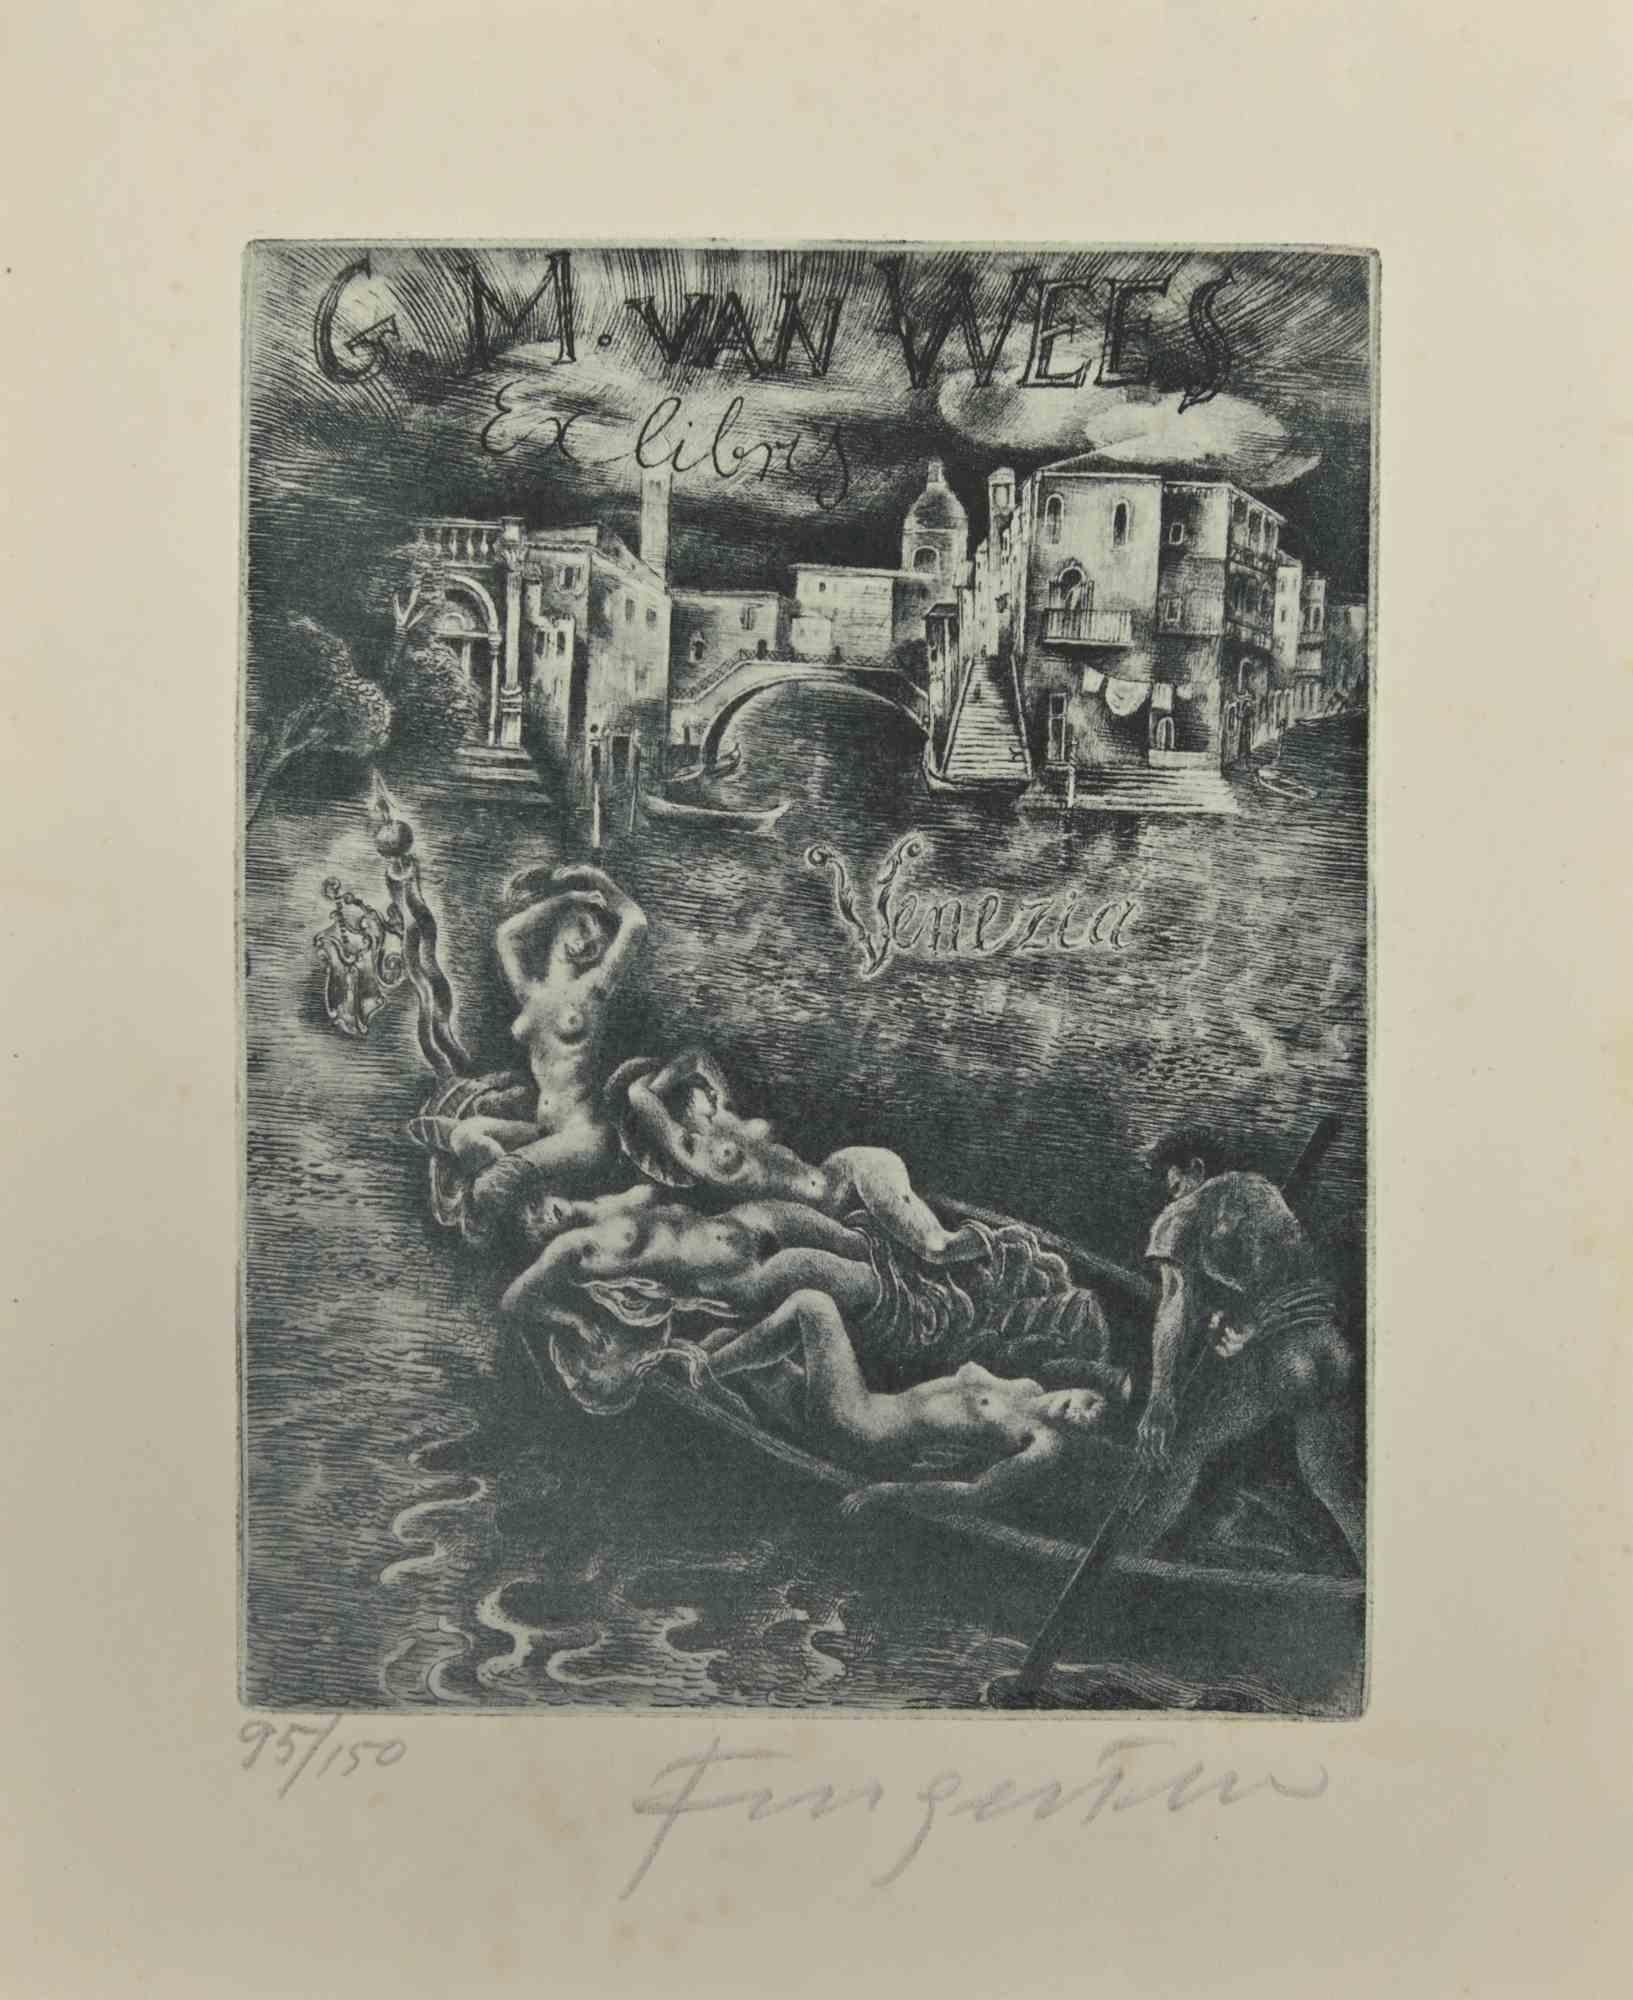 Ex Libris - G.M. Van Wees, Venezia is an Etching print created by  Michel Fingesten.

Hand signed on the lower margin. Numbered on the left corner ex. 95/150

Good conditions except some foxings that doesn't affect the immage.

Michel Fingesten